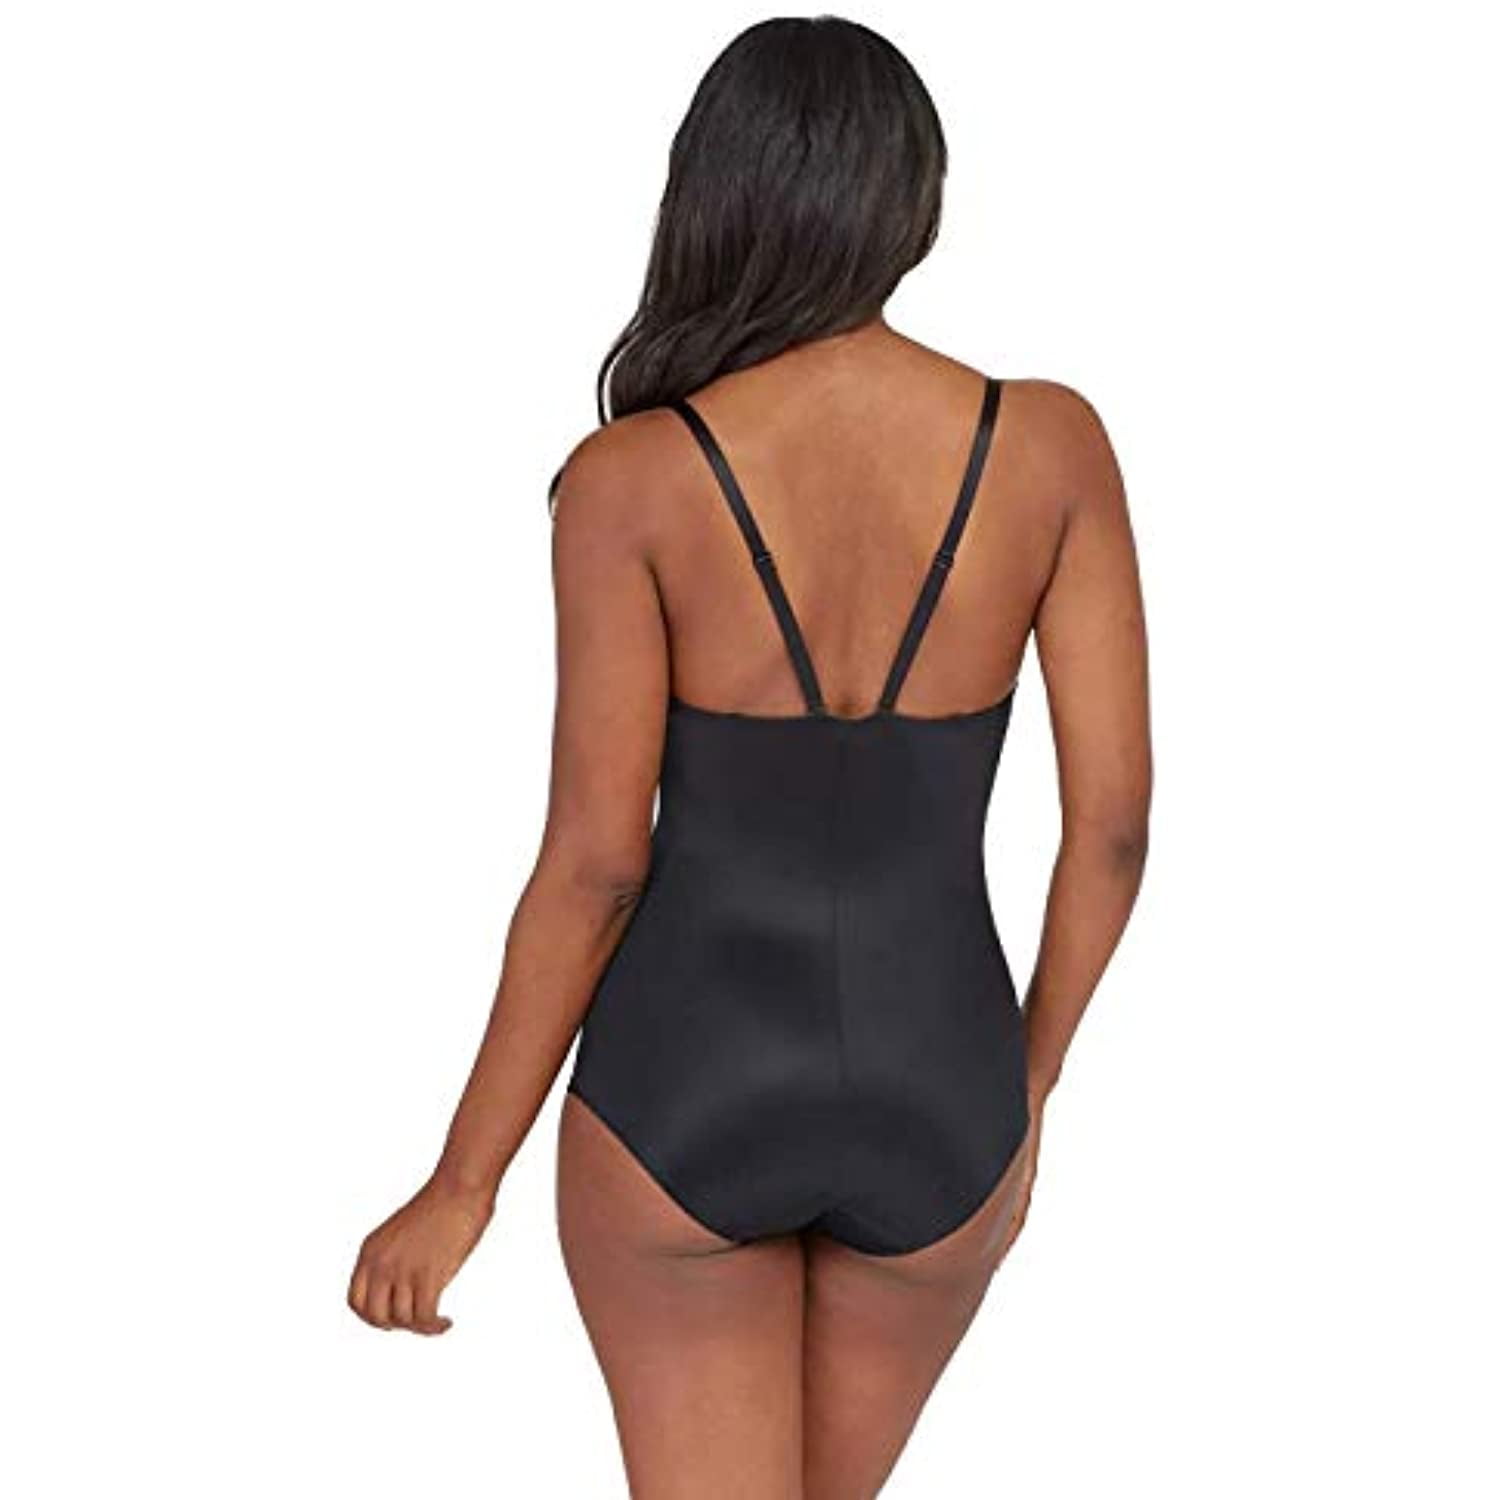 Assets by Spanx Flawless Finish Shaping Bodysuit Size Medium